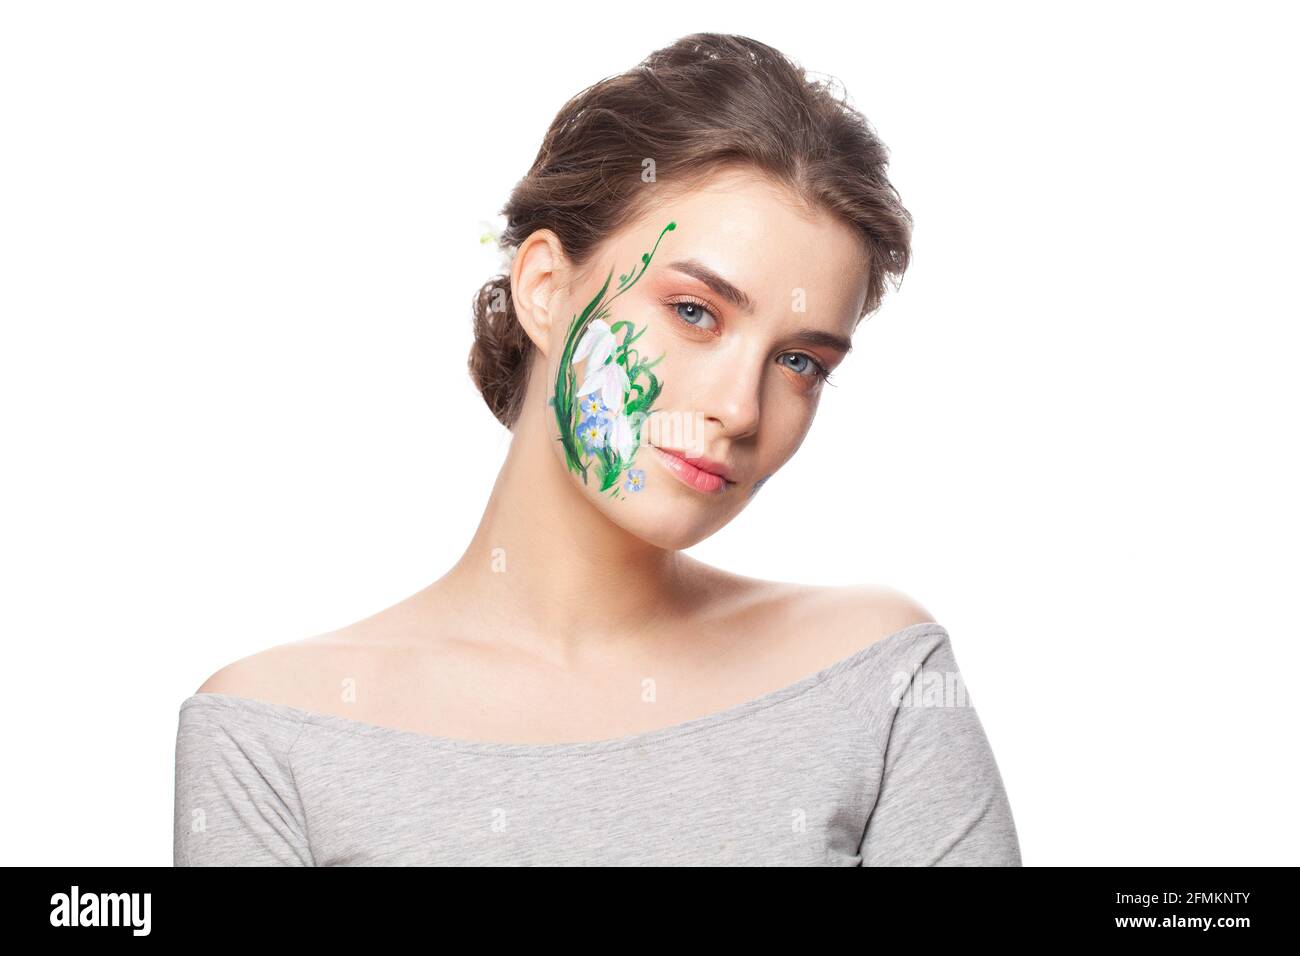 Cute woman with painted spring flowers on her face isolated on white background Stock Photo